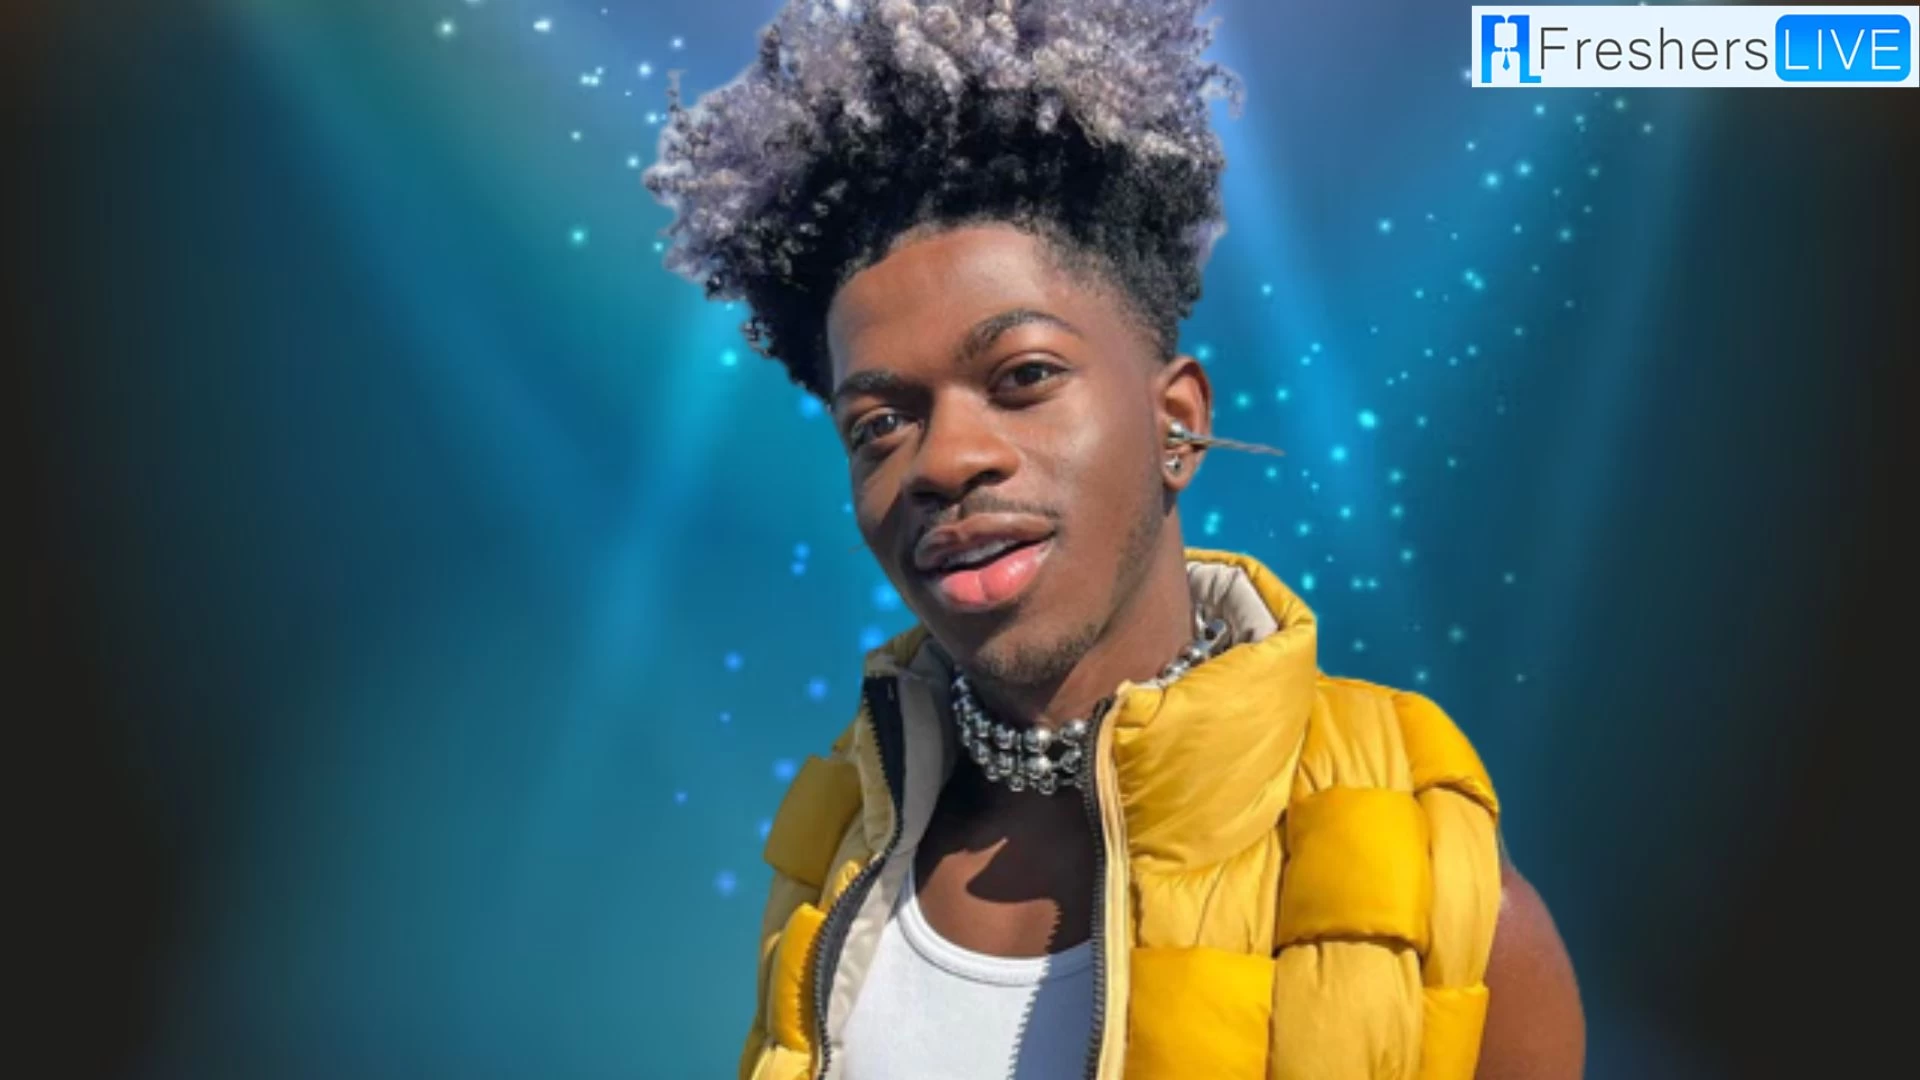 Does Lil Nas X Have Kids? Who is Lil Nas X? Lil Nas X's Age, Family, Parents and More